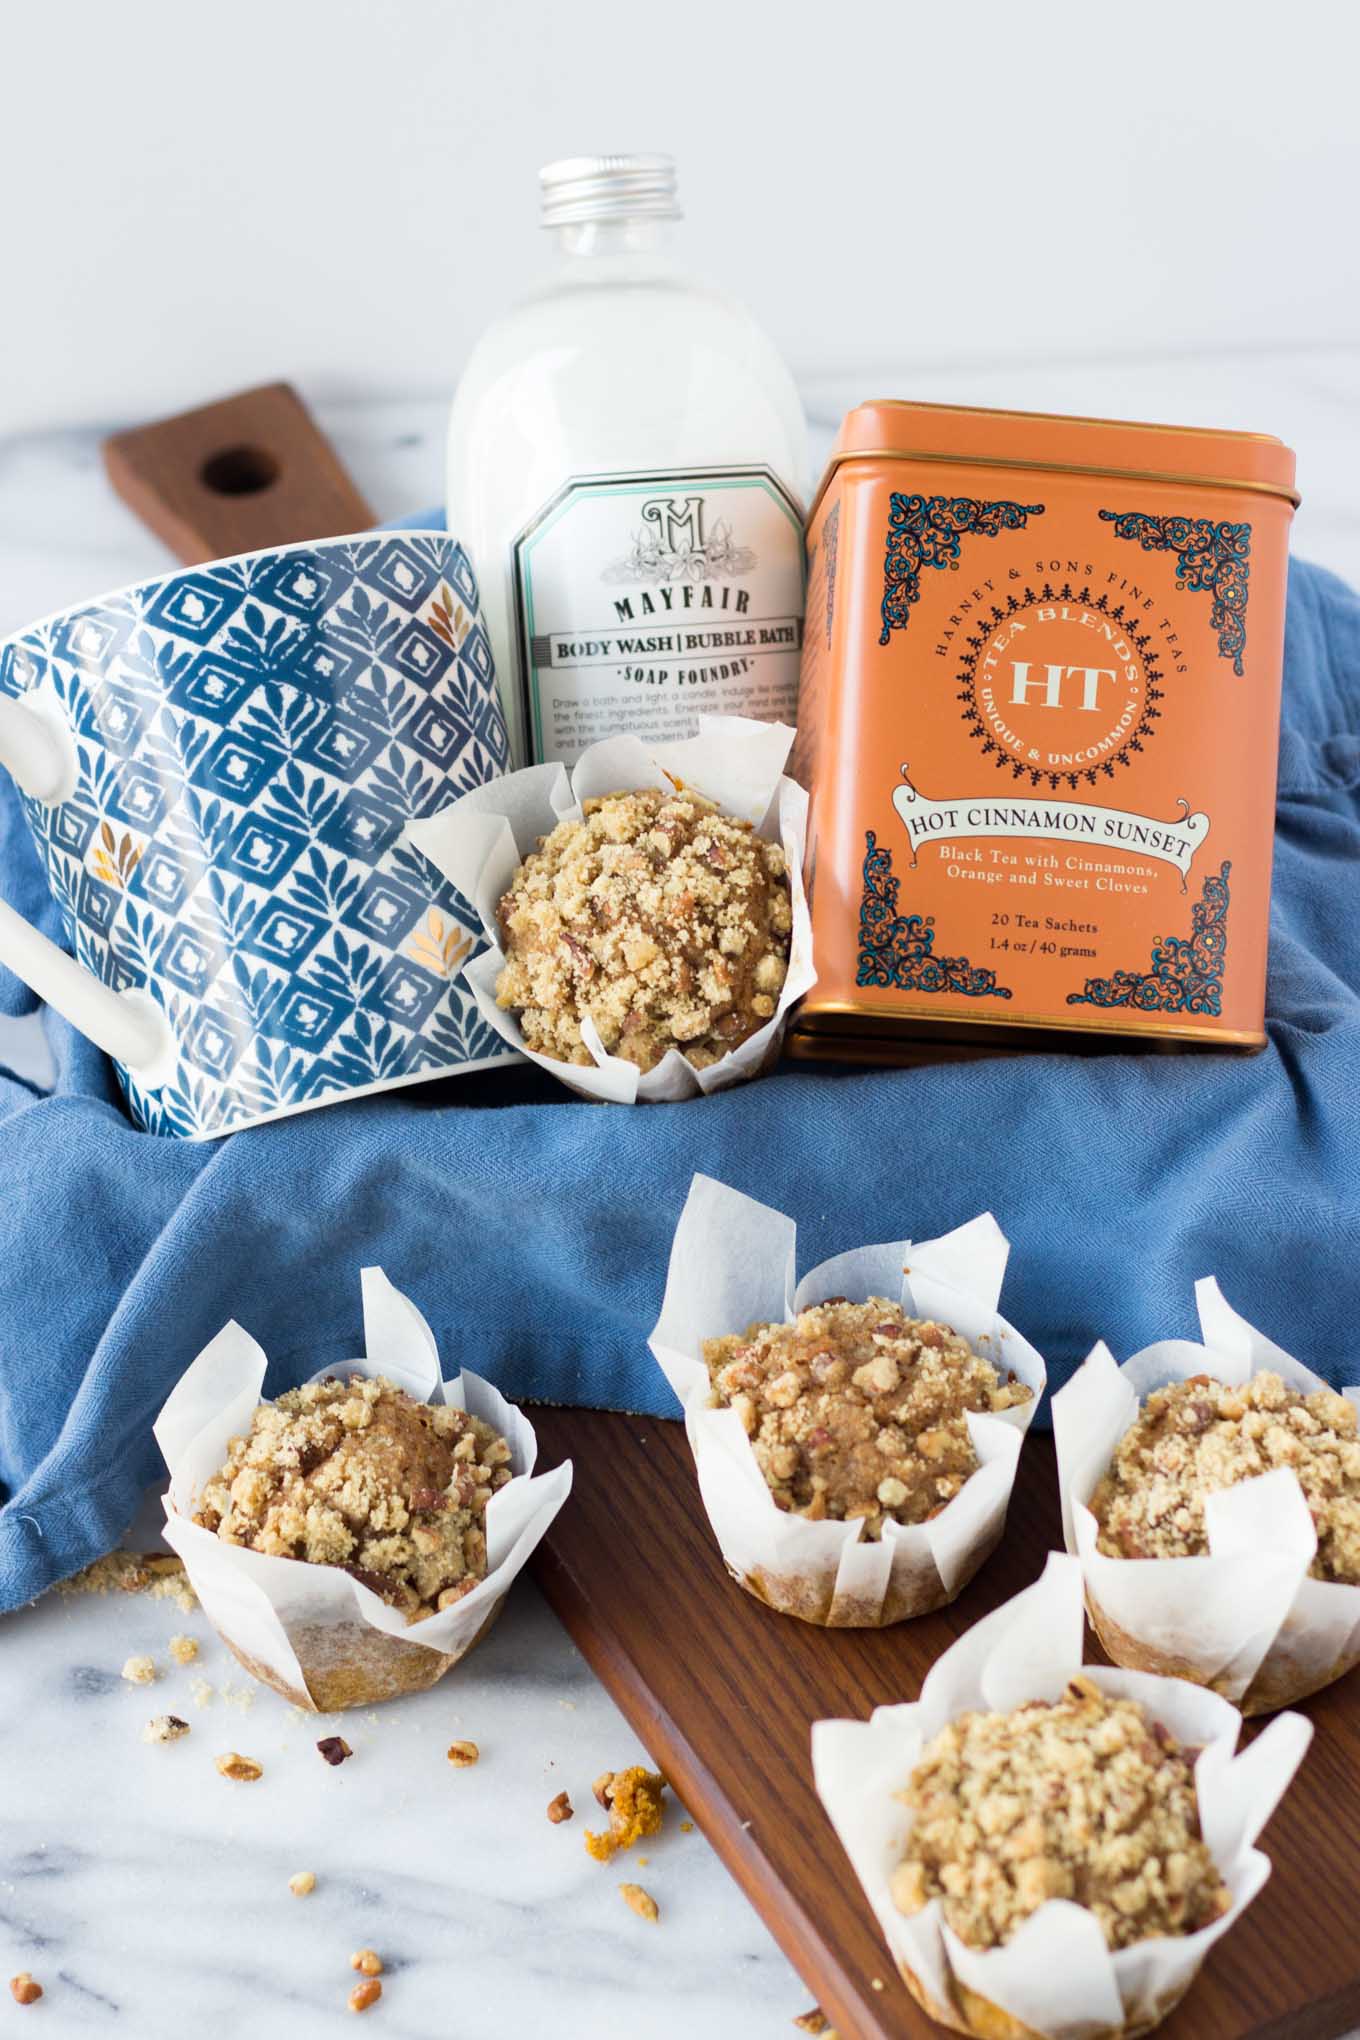 Pumpkin Spice Muffins with Pecan Crumble | Fork in the Kitchen